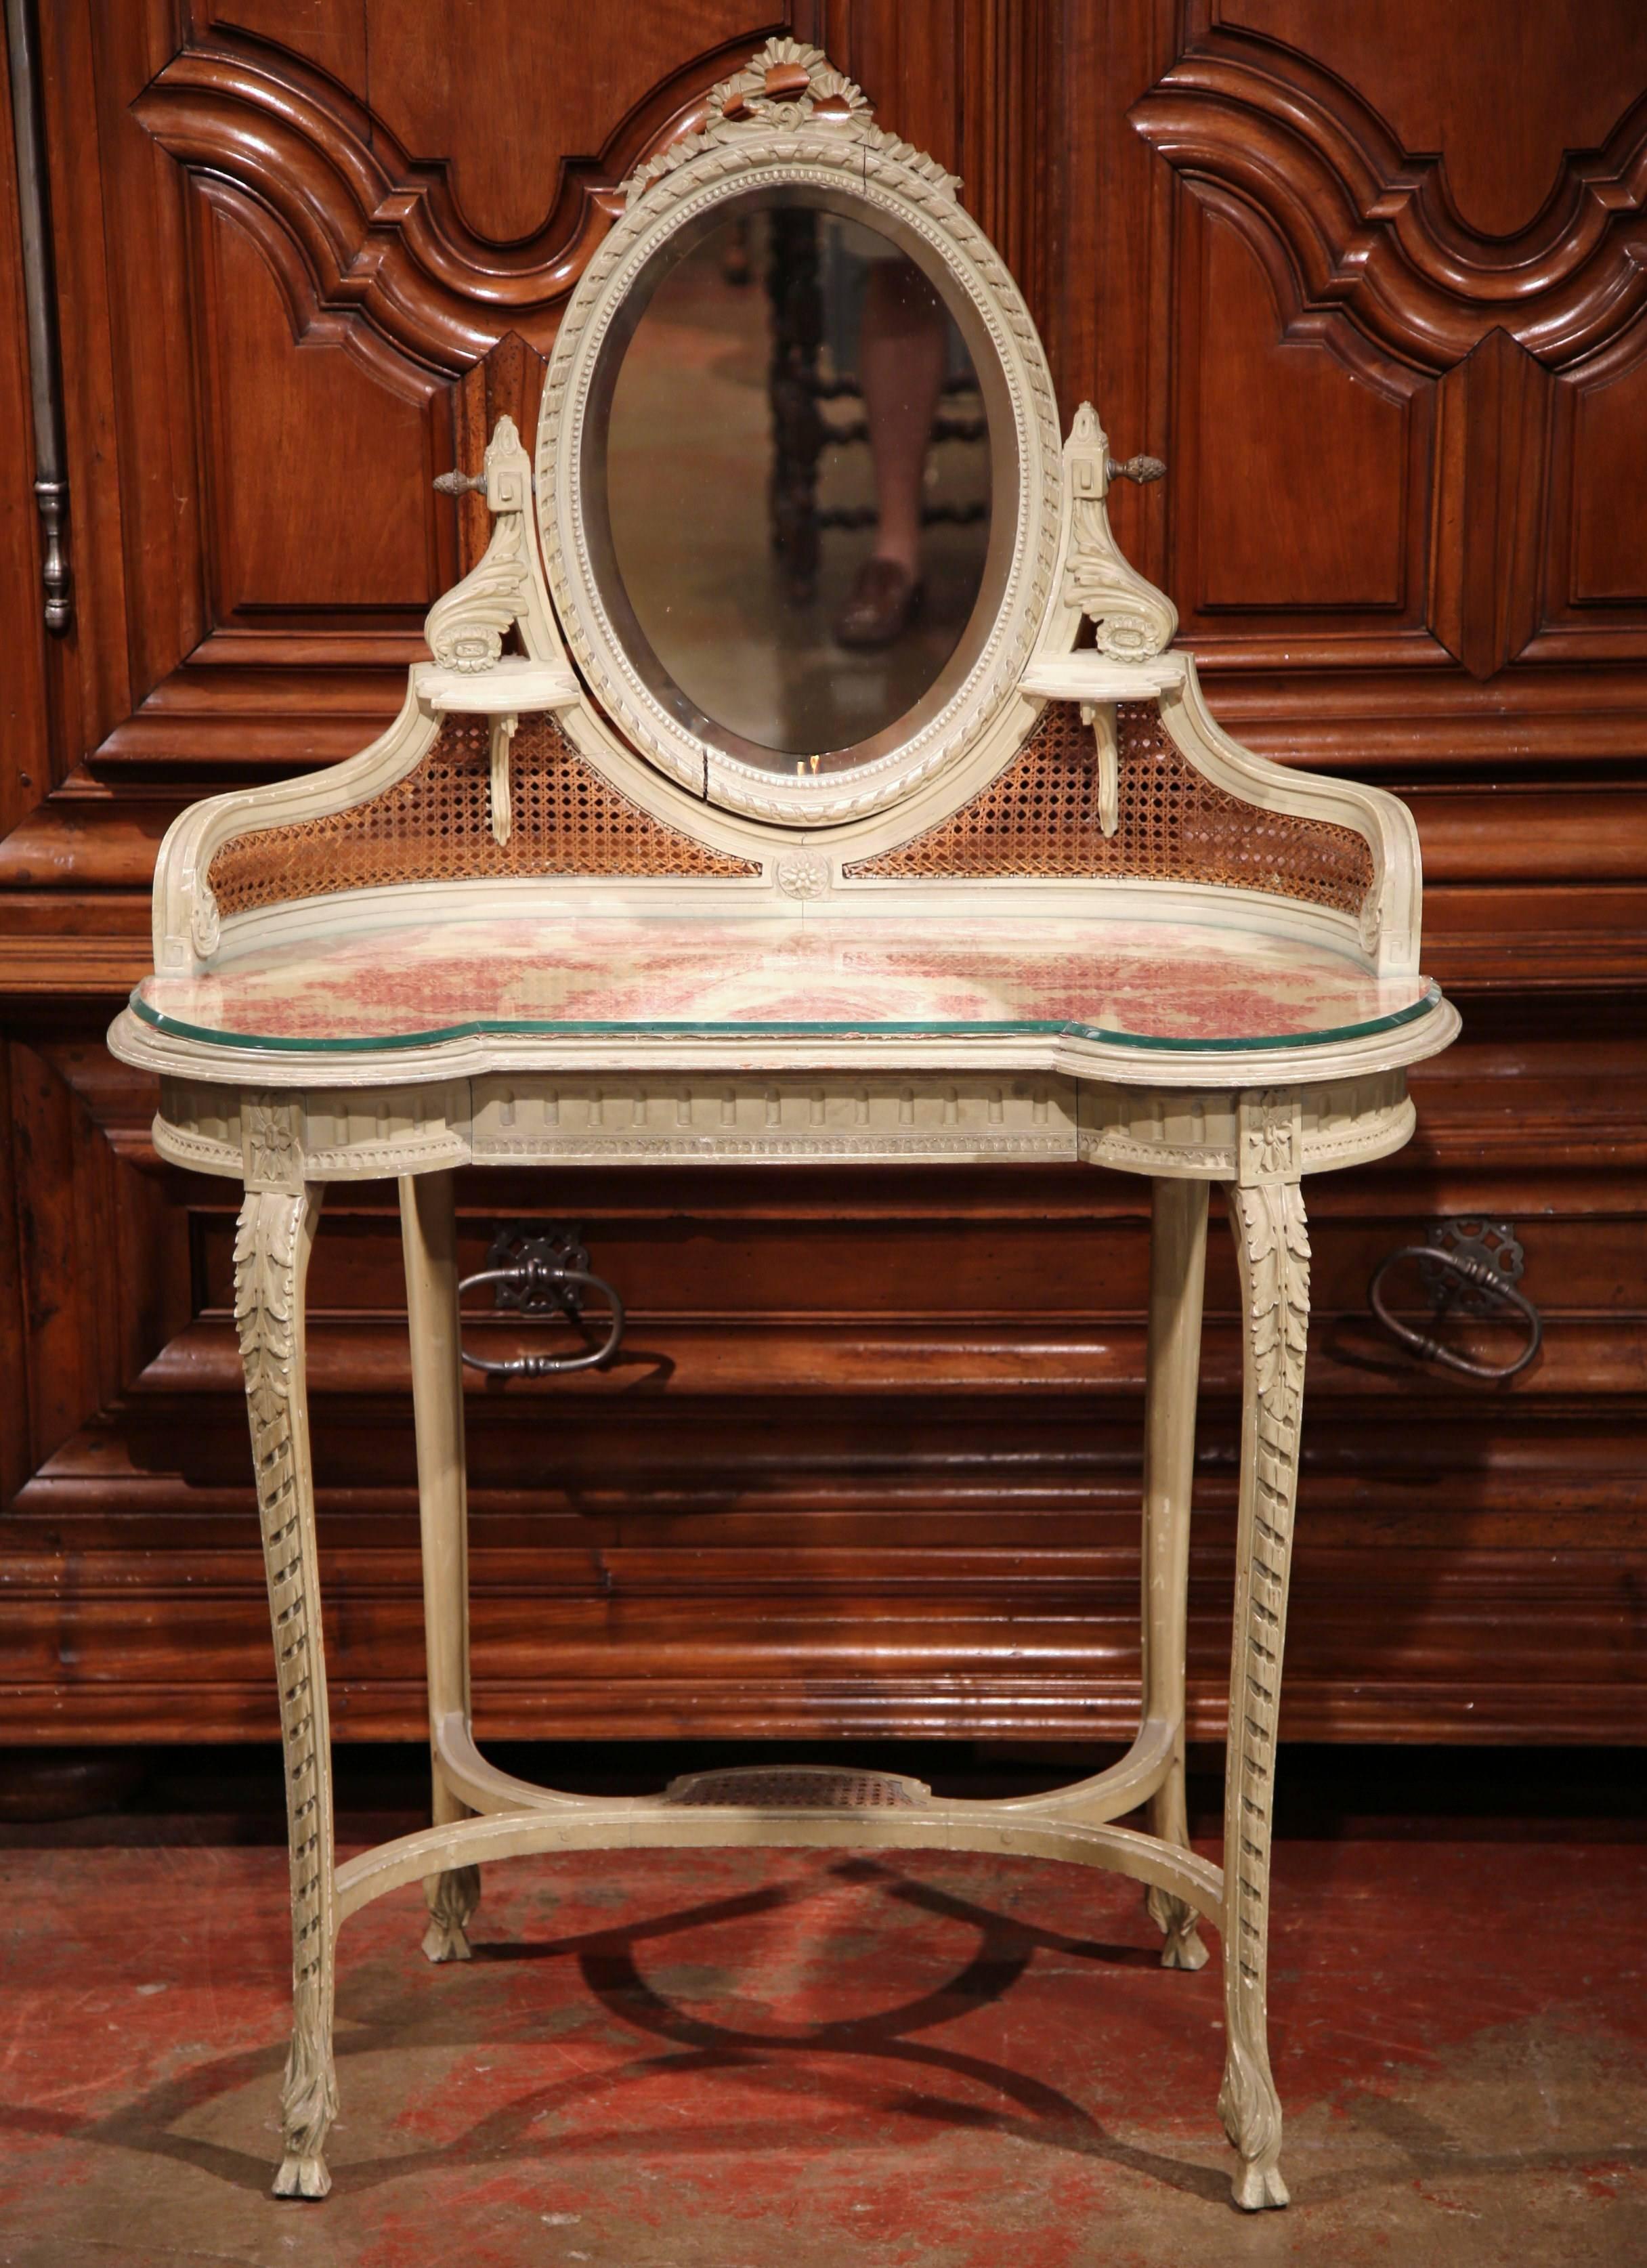 Add French elegance to your bathroom or bedroom with this antique vanity from Versailles, France, circa 1880. The French coiffeuse features a swivel oval beveled glass mirror adjustable with two side brass knobs, and a wide drawer across the front.